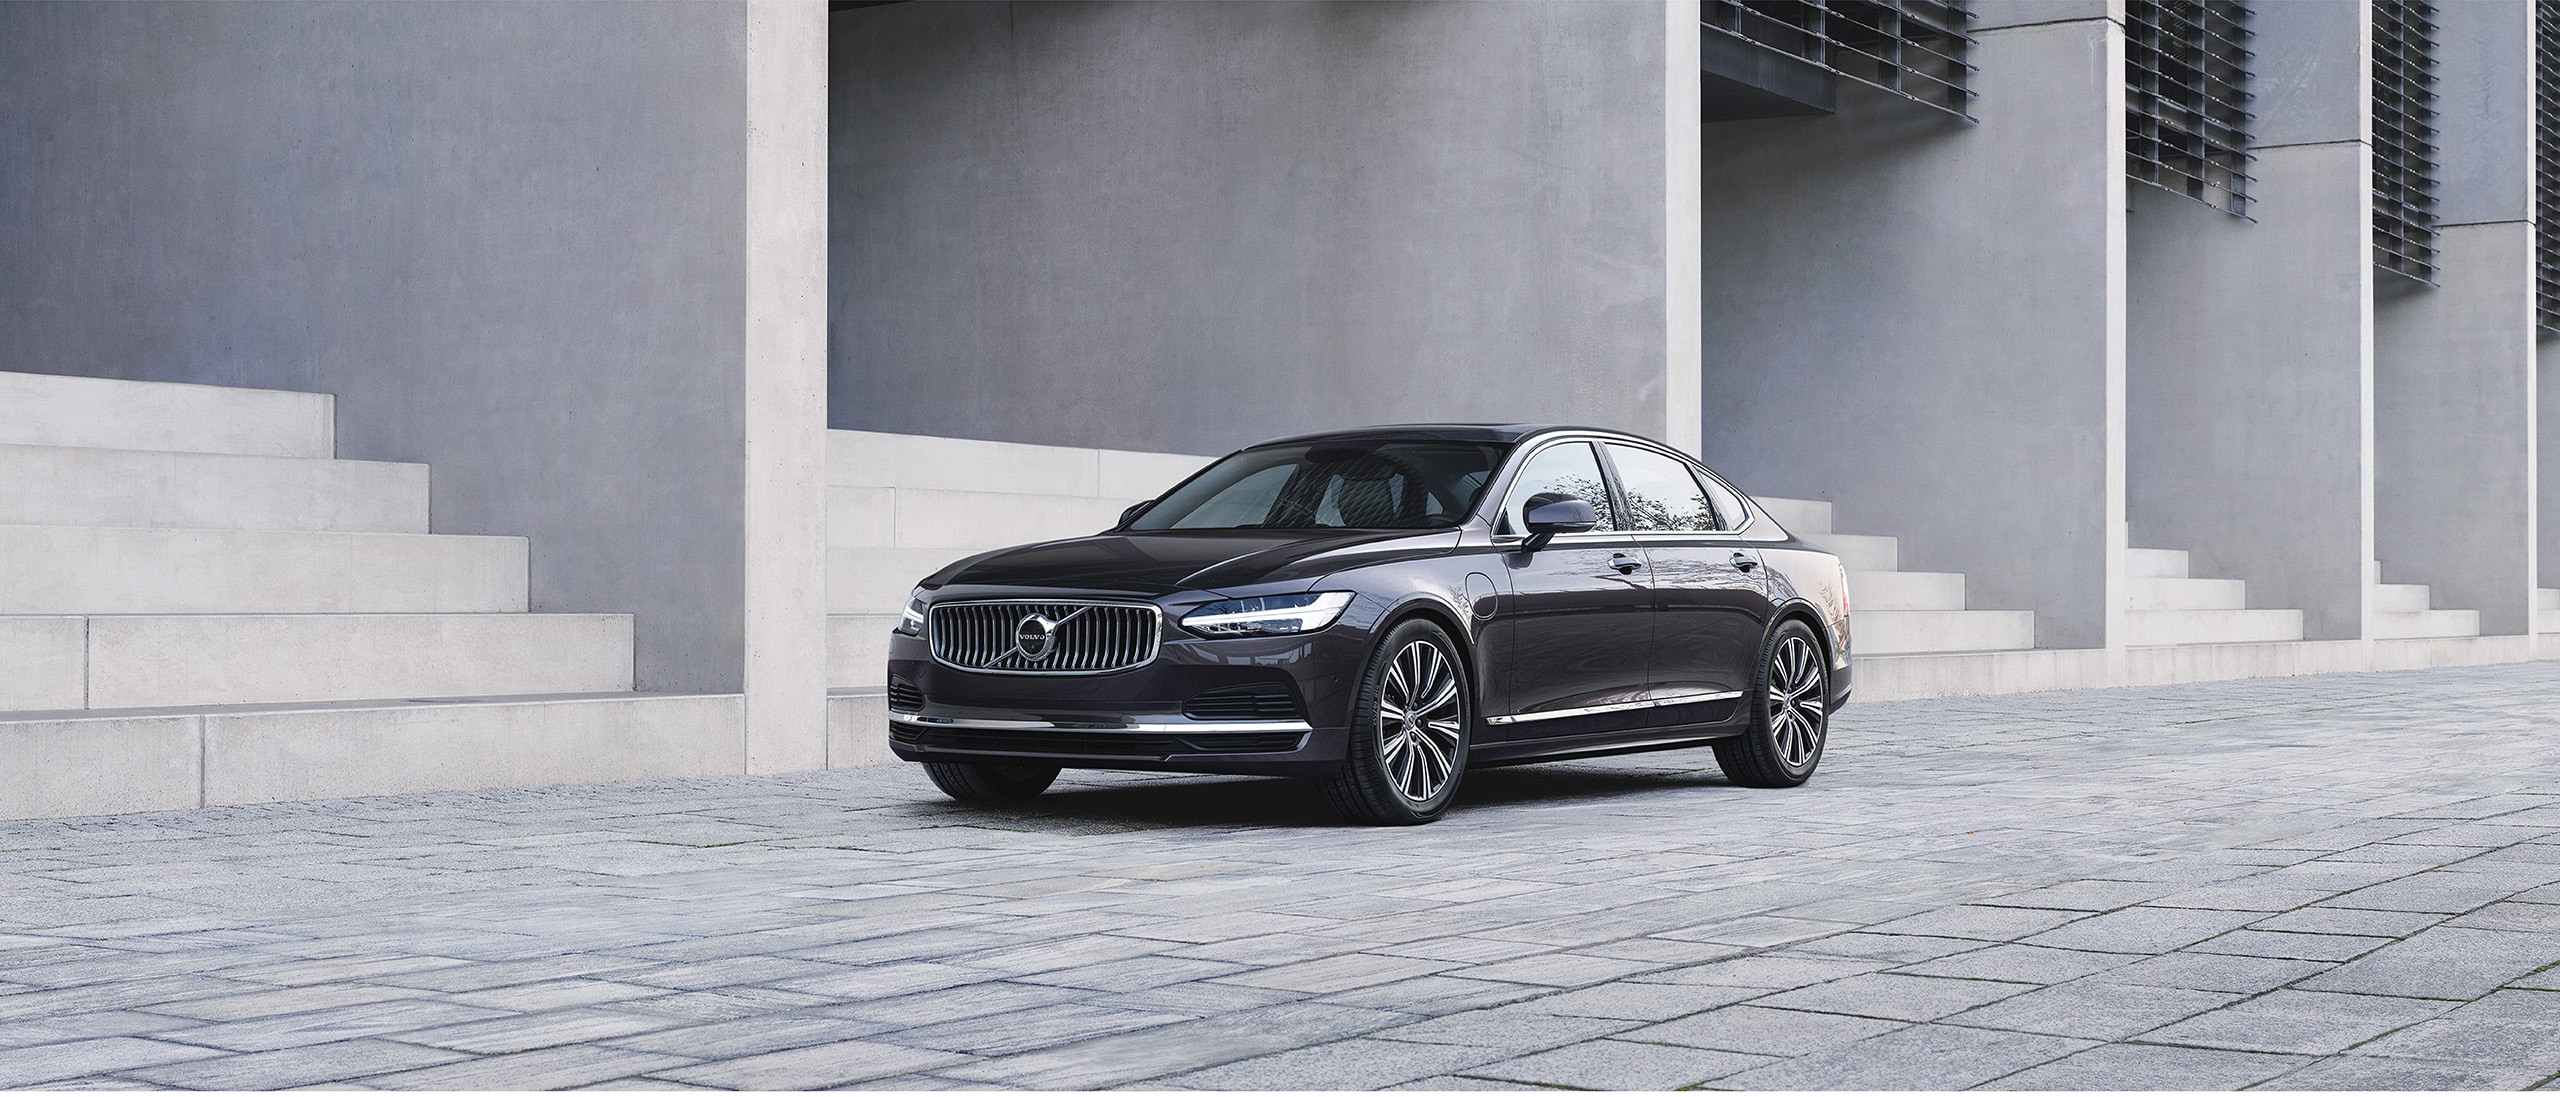 One more car. To help save more lives. The all-new Volvo S90.